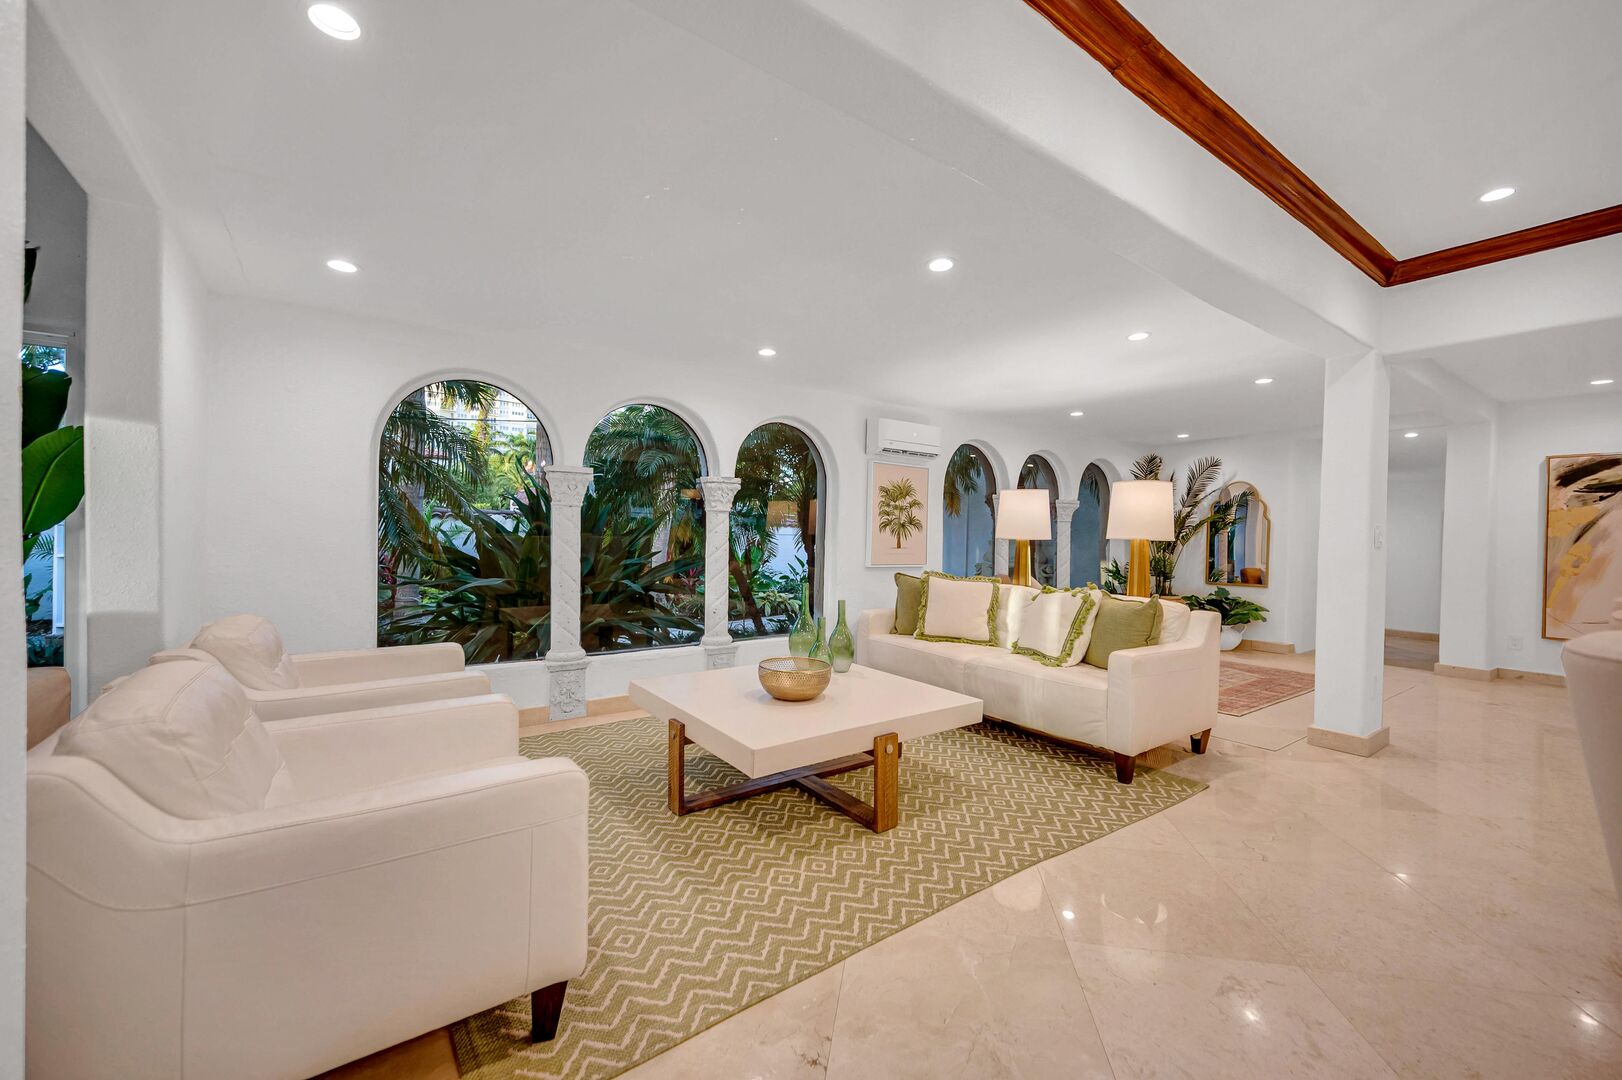 The living area features garden view through arched windows.